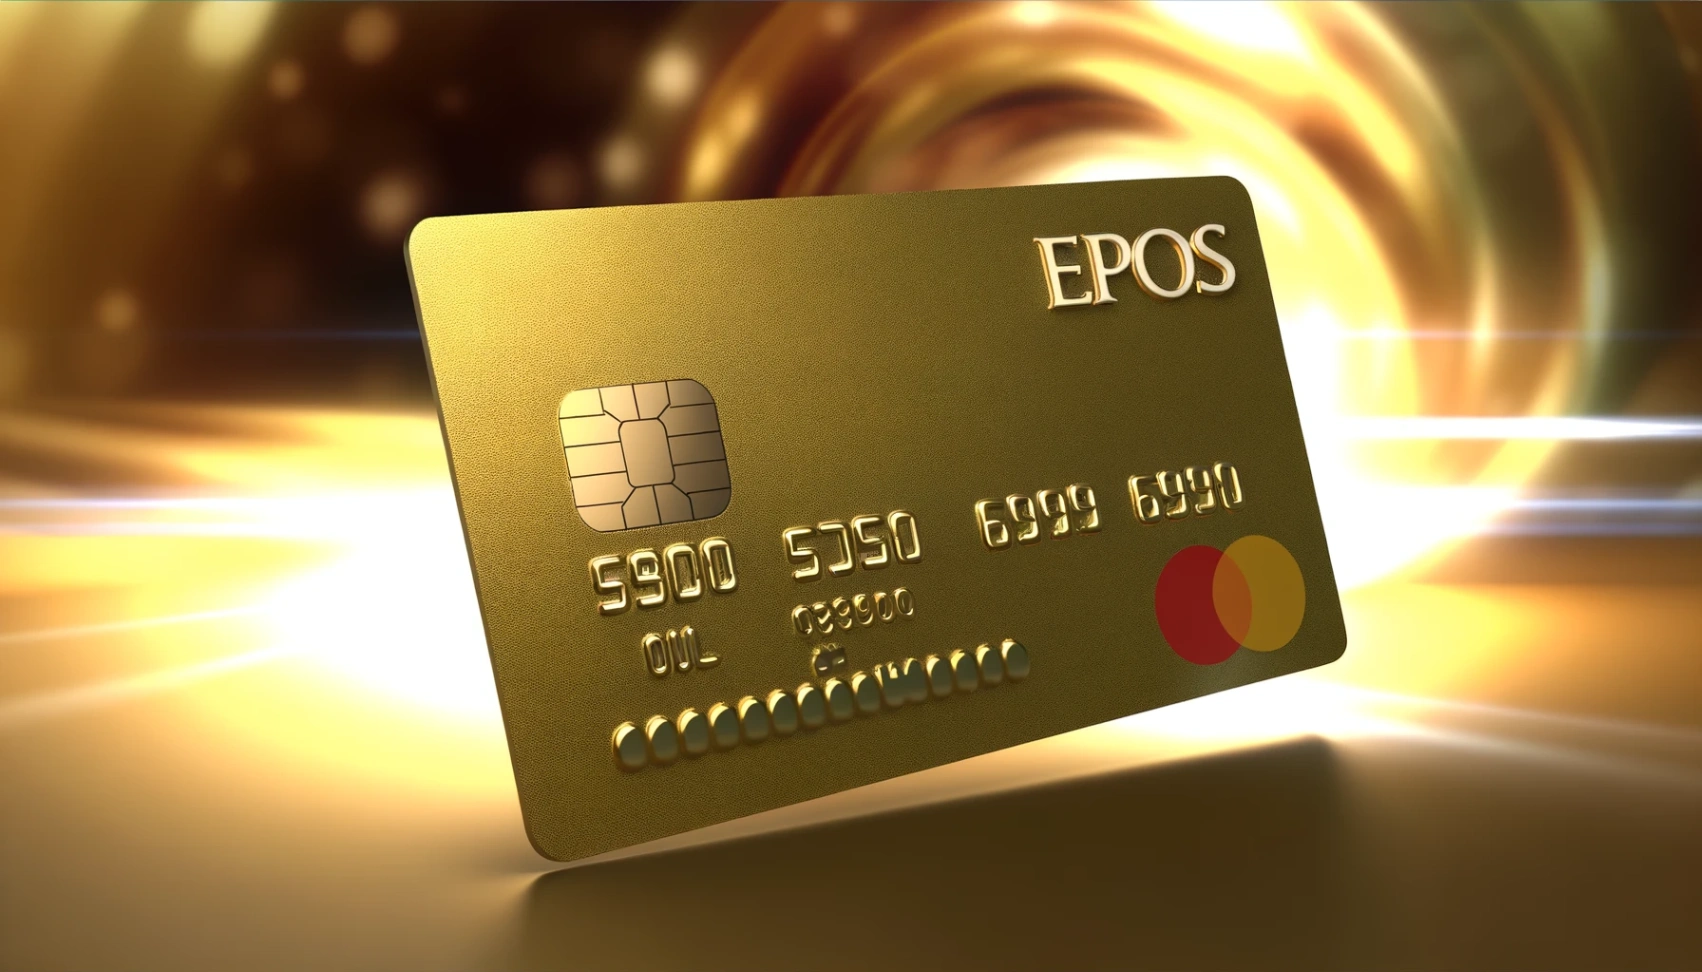 Epos Gold Credit Card - How to Apply Online